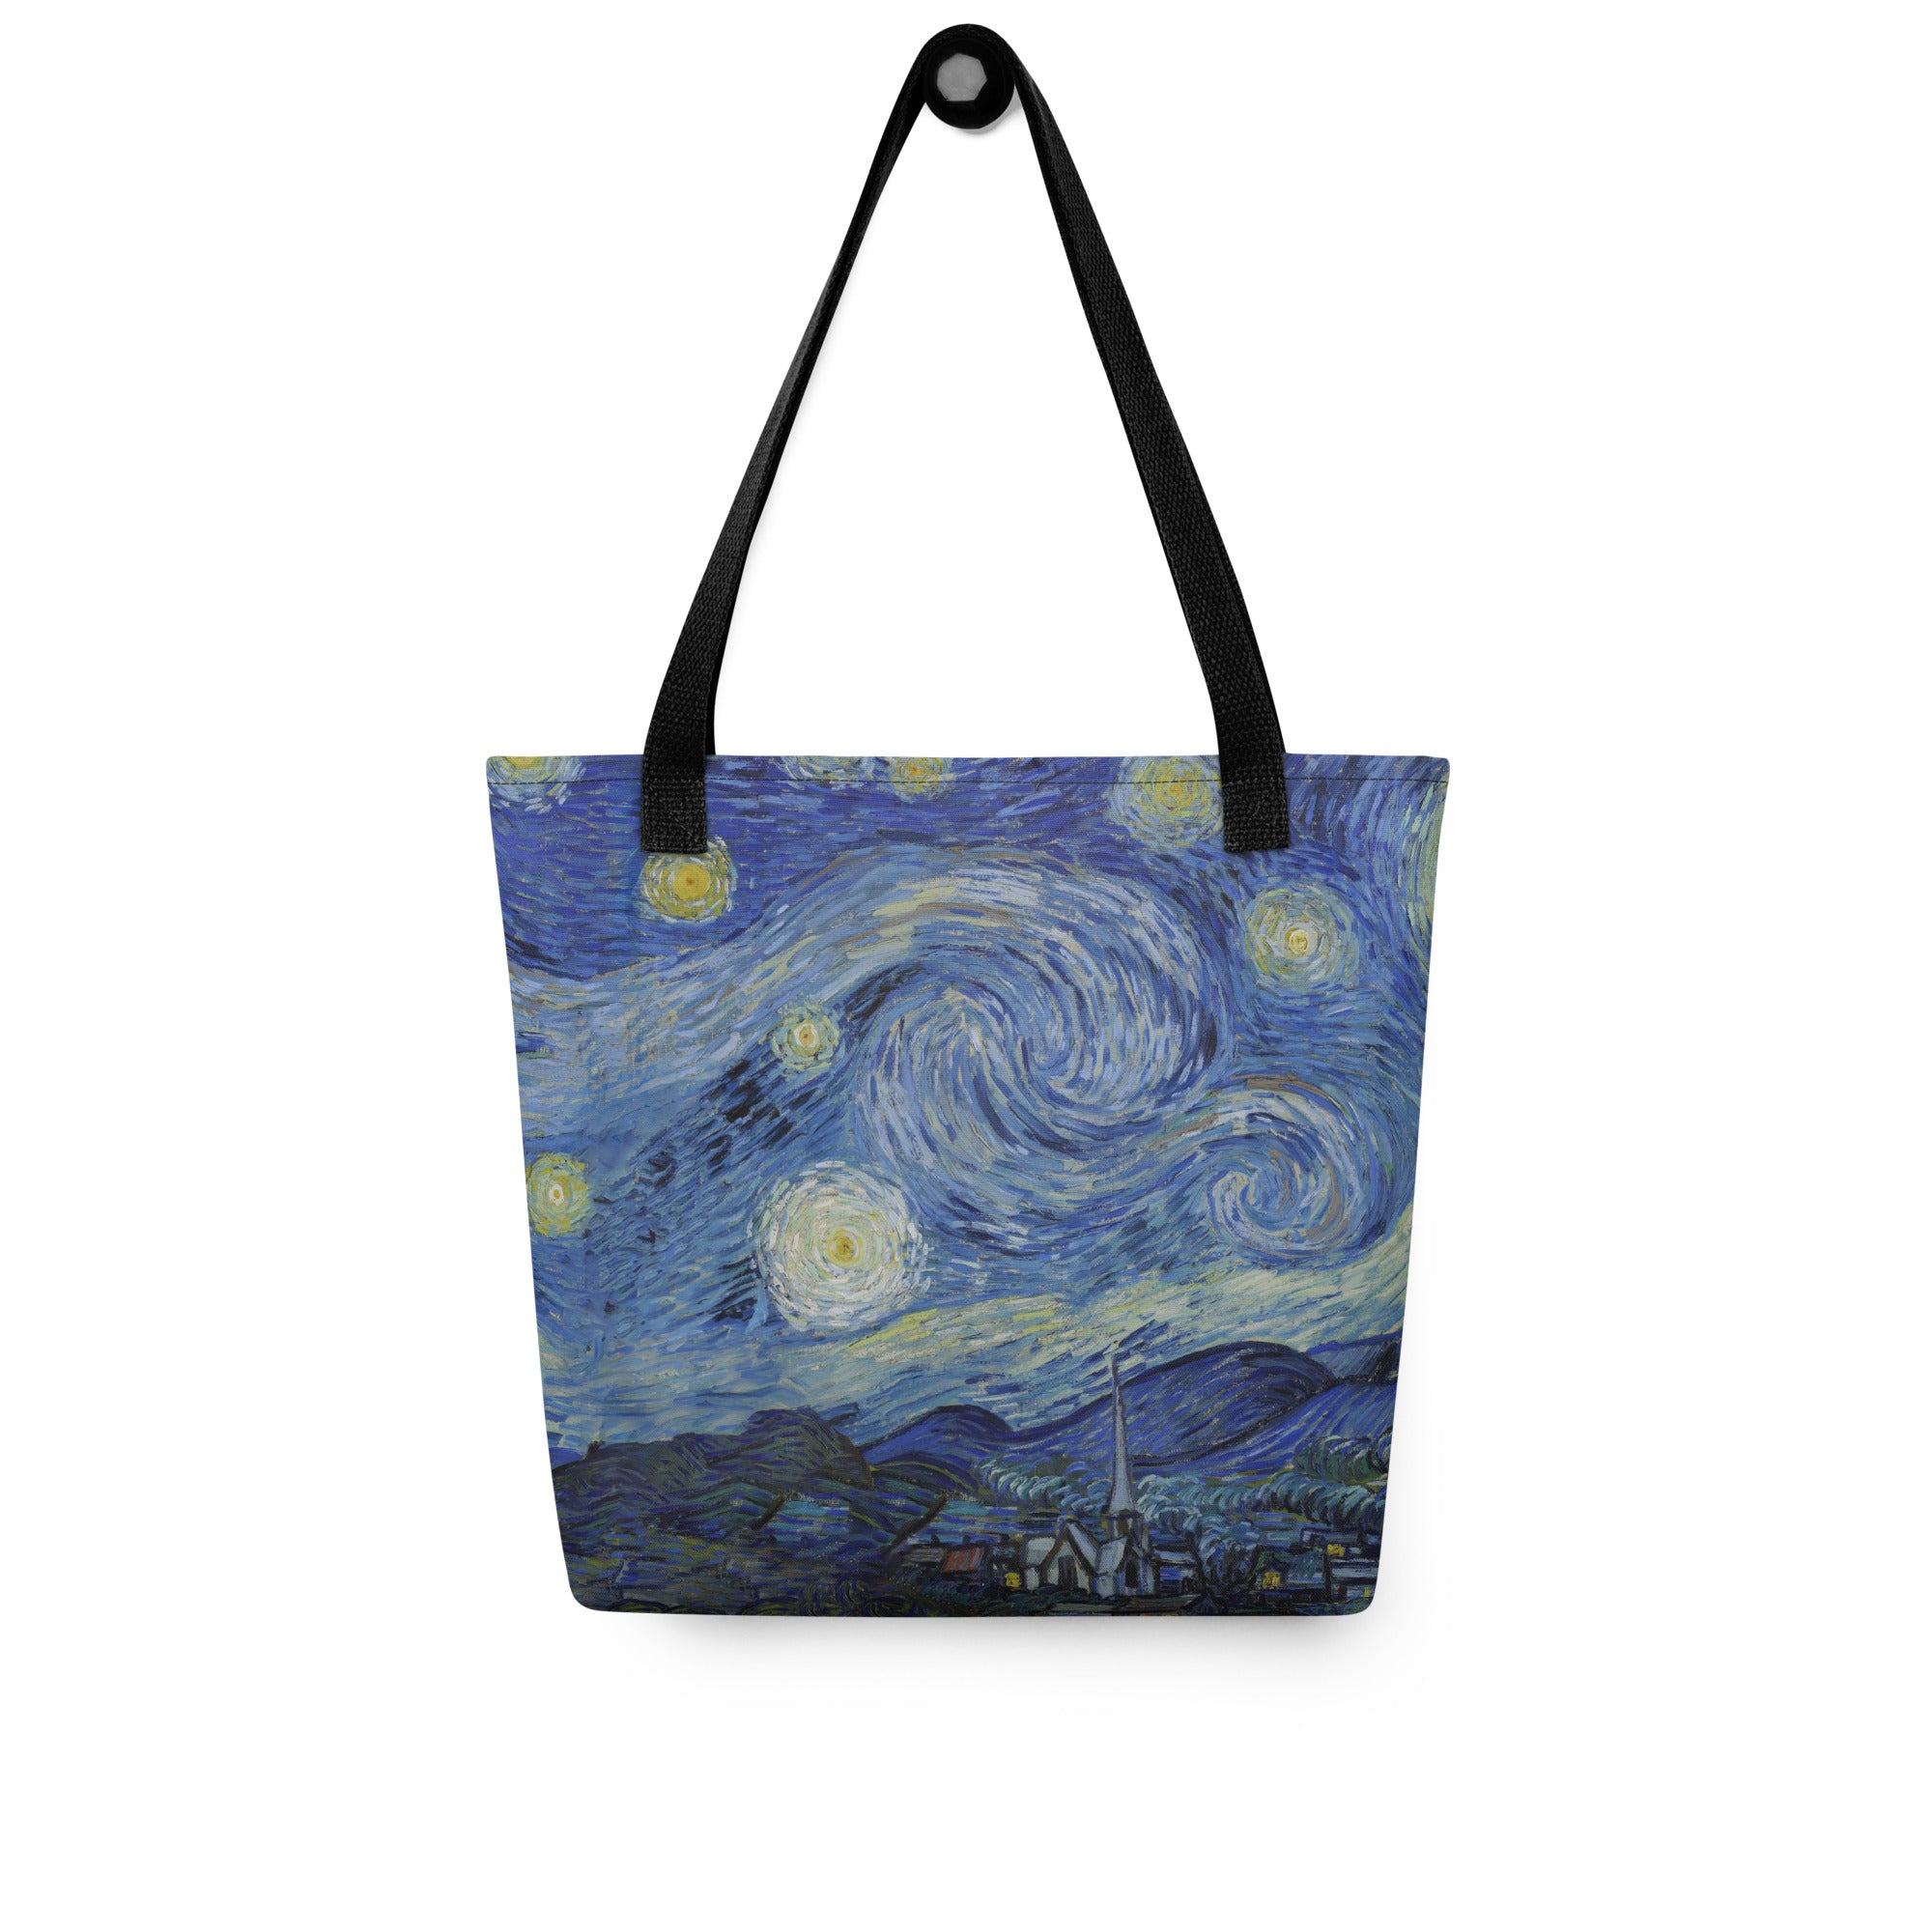 Vincent van Gogh 'Starry Night' Famous Painting Totebag | Allover Print Art Tote Bag